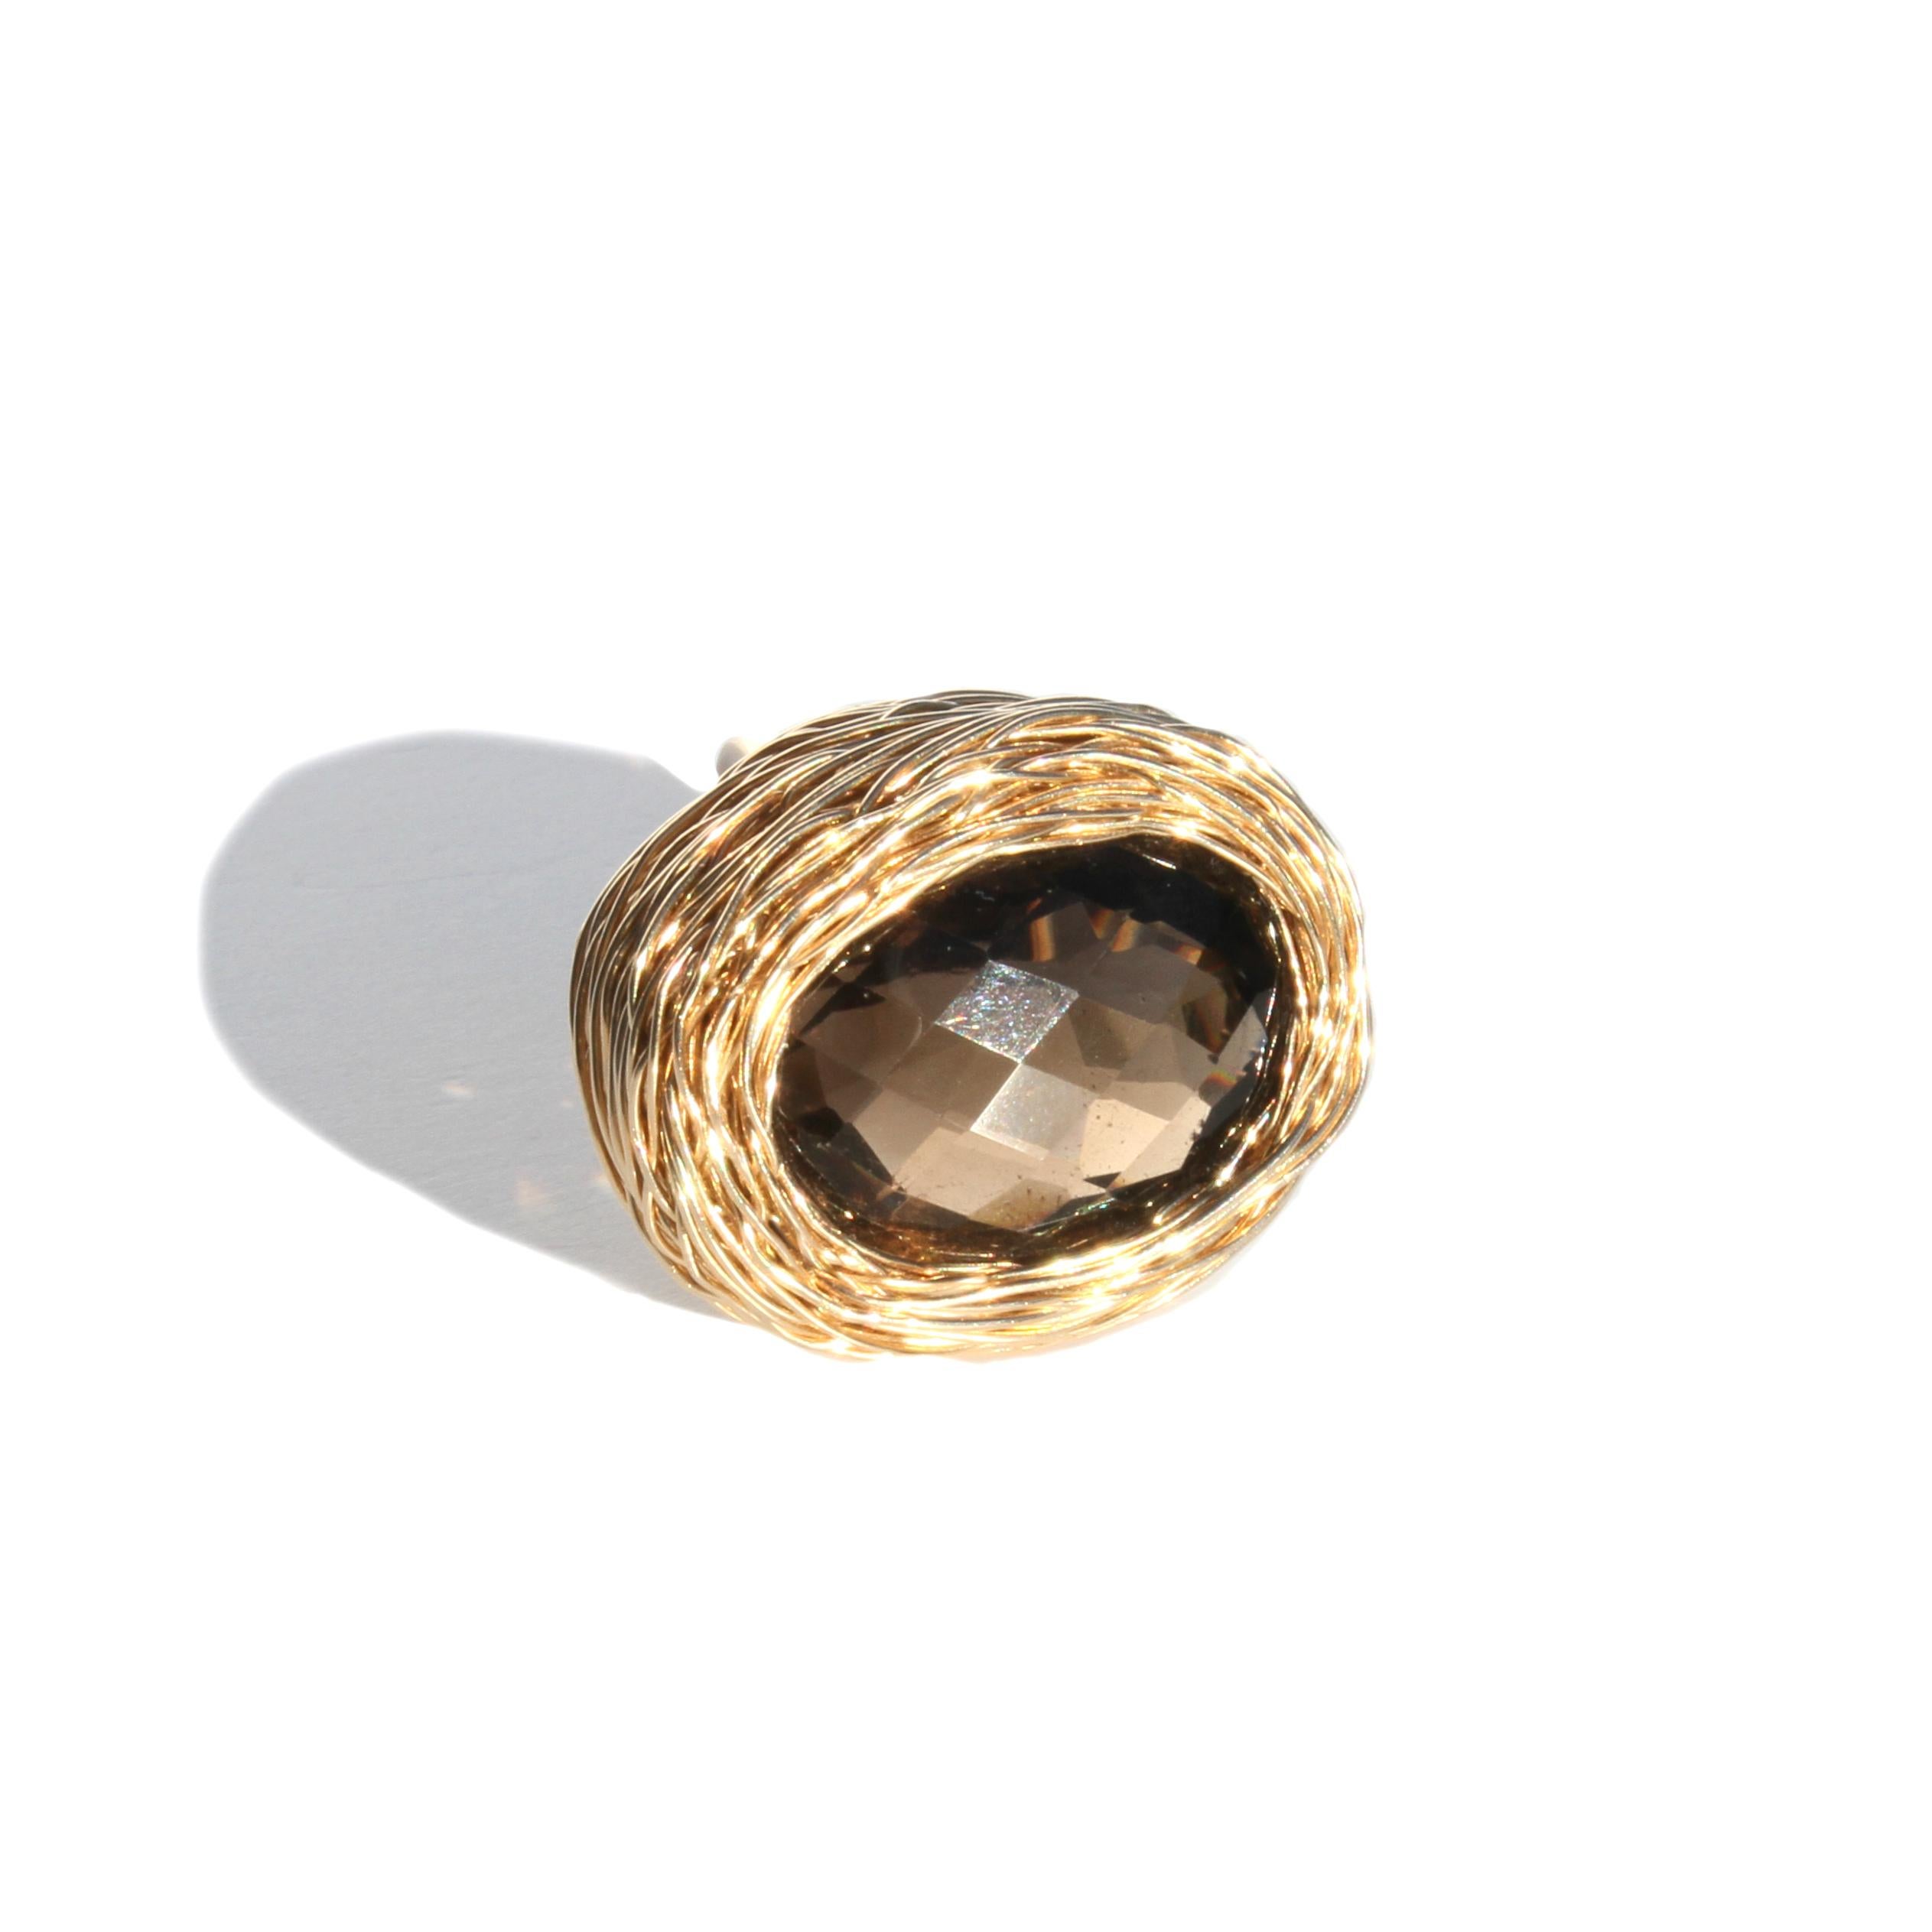 Contemporary Deep Faceted Oval Smoky Quartz in Gold Statement Ring by Sheila Westera